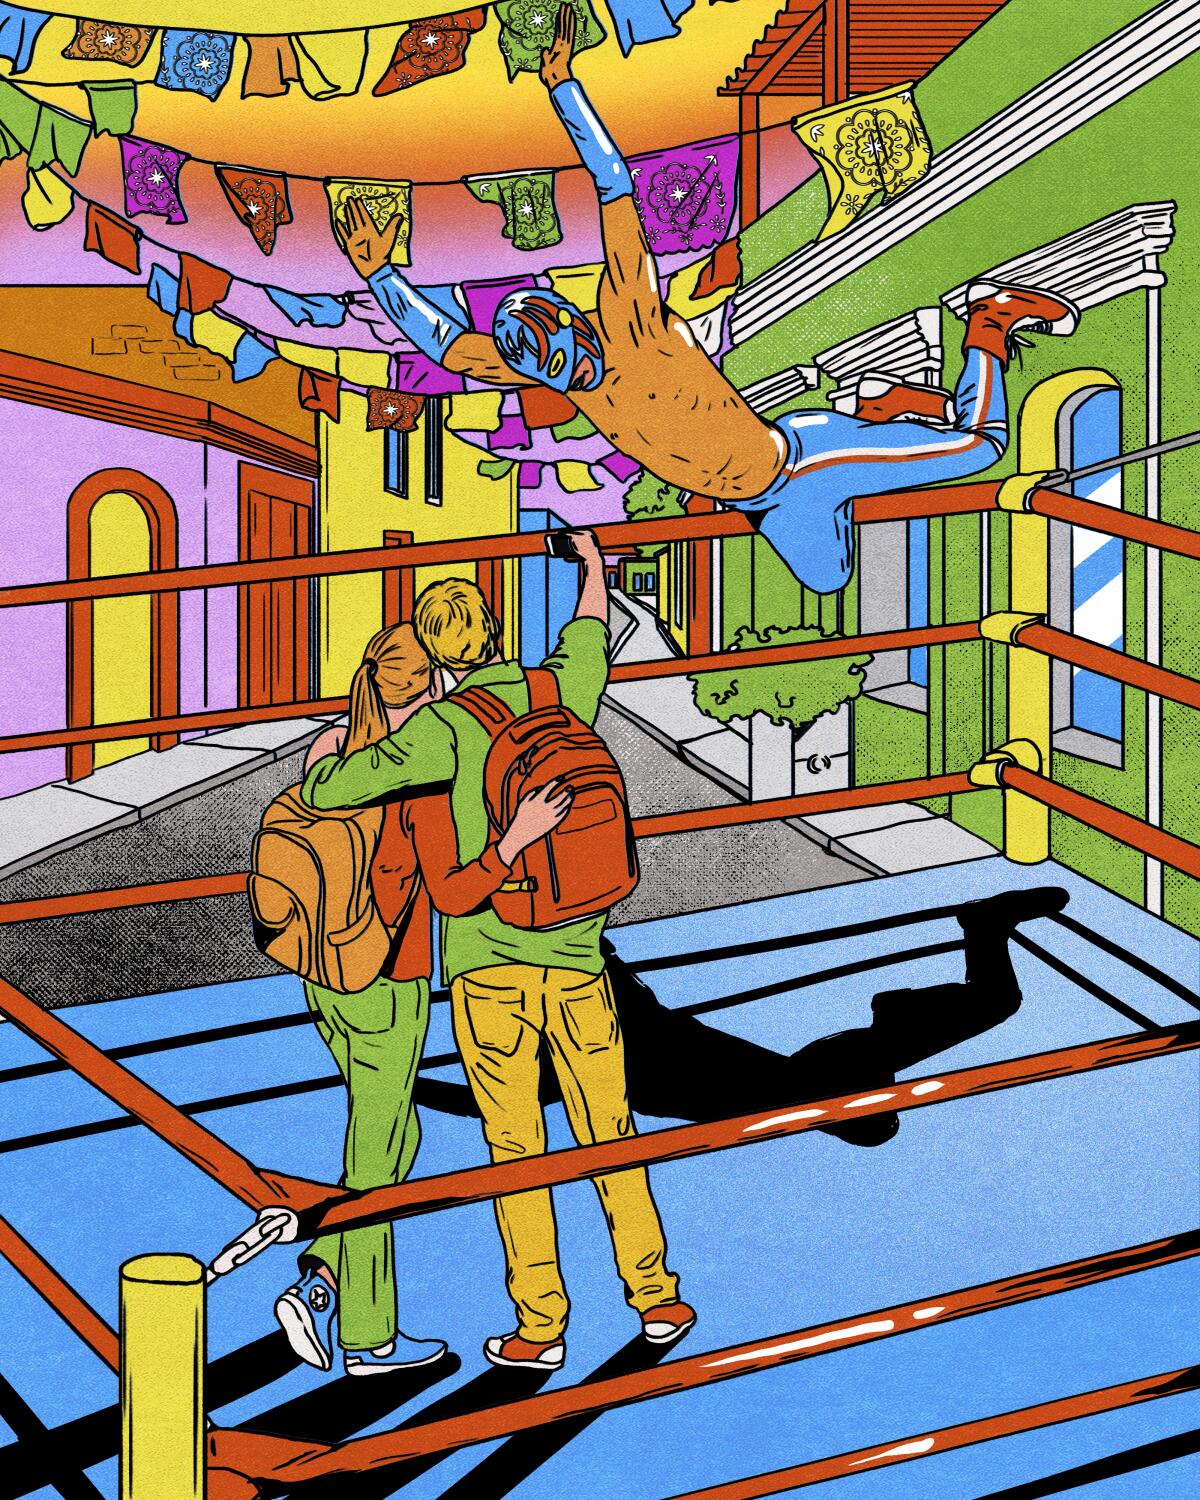 An illustration of tourists taking a photo in a lucha libre ring